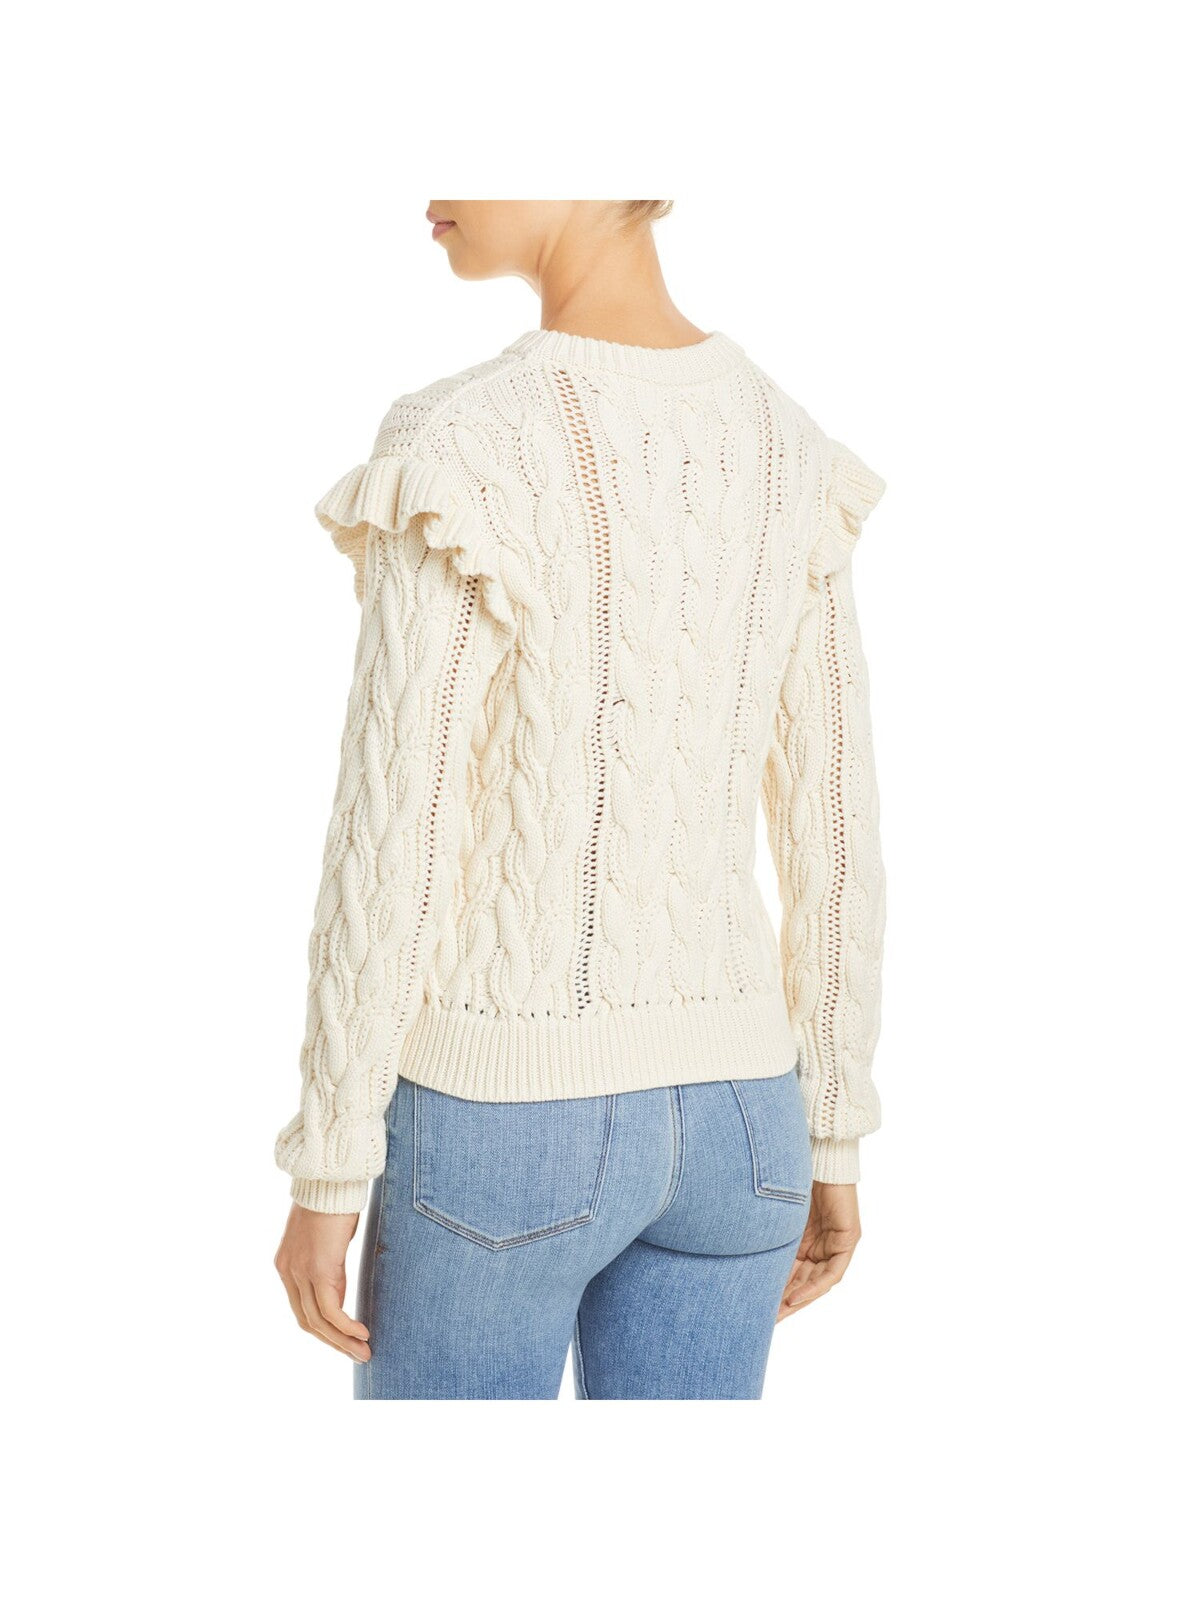 FRAME Womens Ivory Stretch Ruffled Ribbed Trim Long Sleeve Round Neck Wear To Work Sweater XS